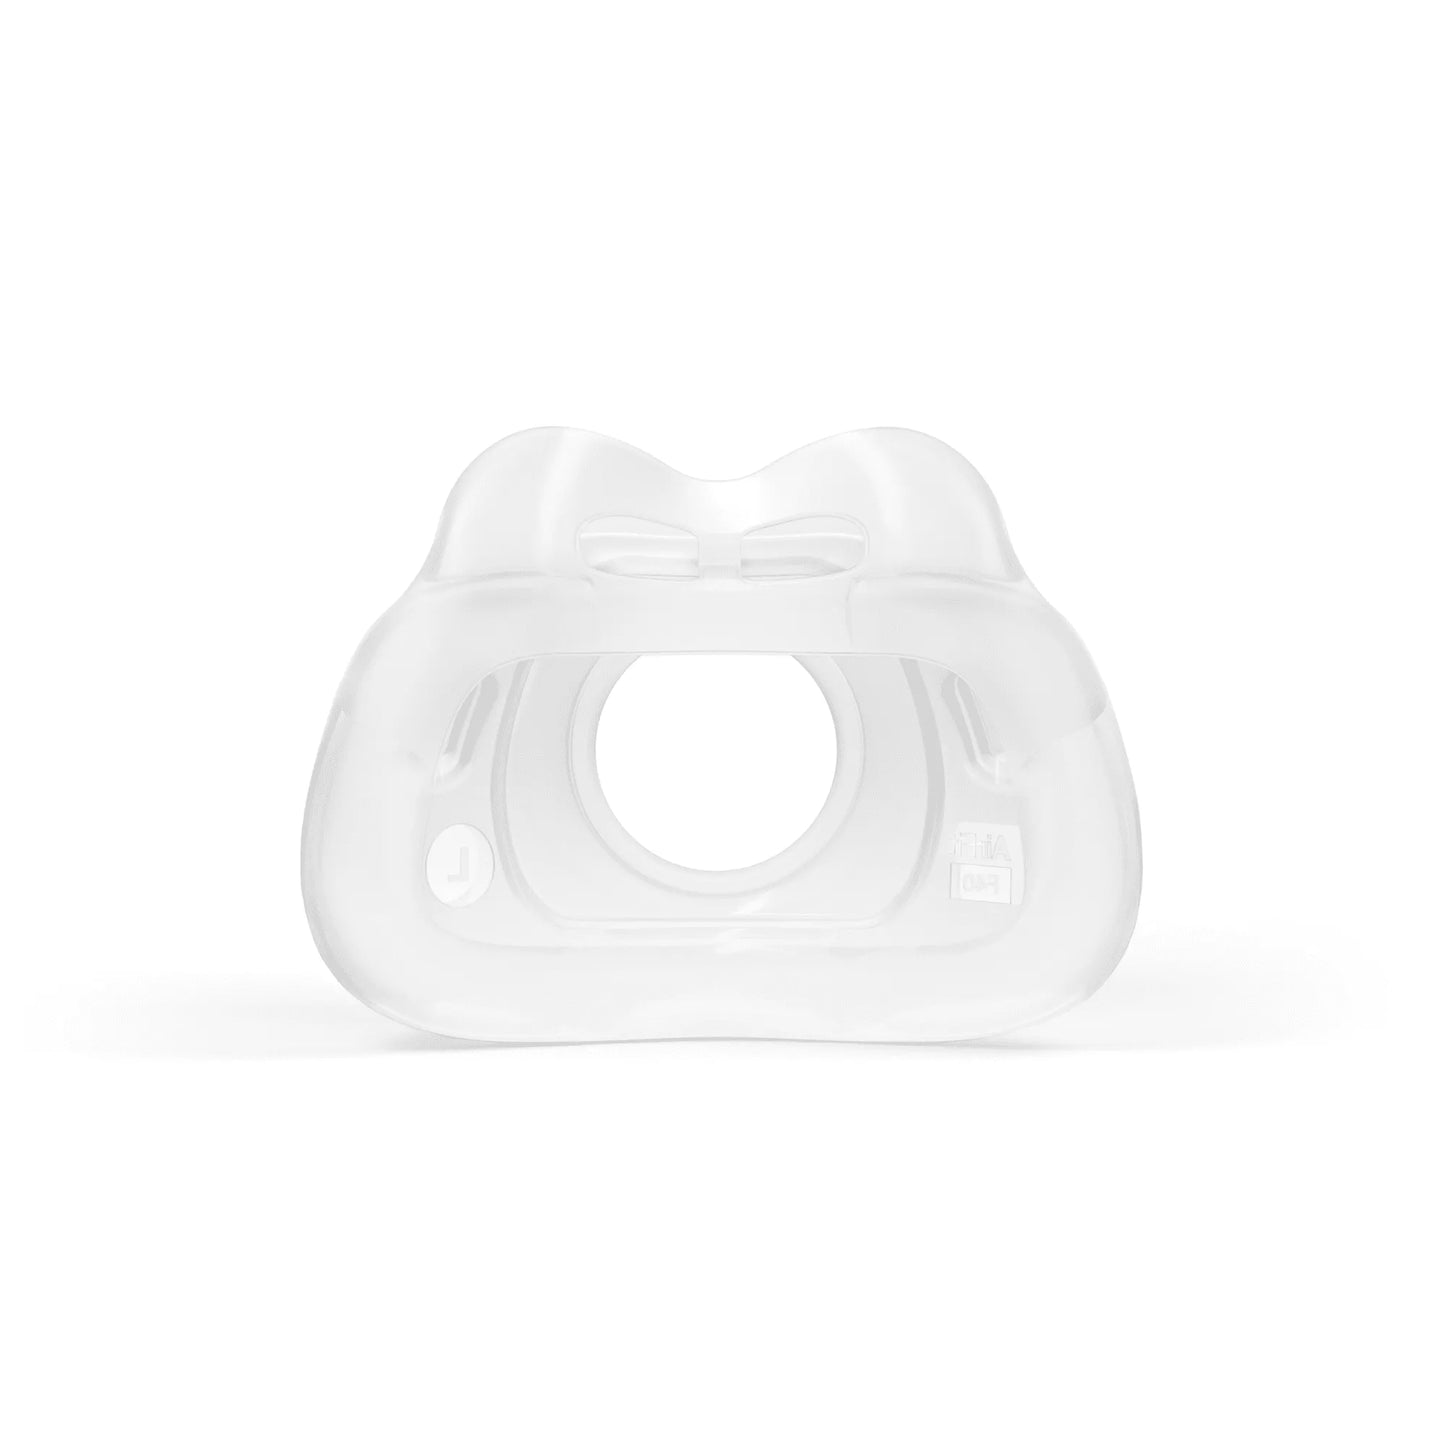 Soft and flexible cushion of the AirFit F40 mask, designed to provide a secure seal for CPAP therapy.